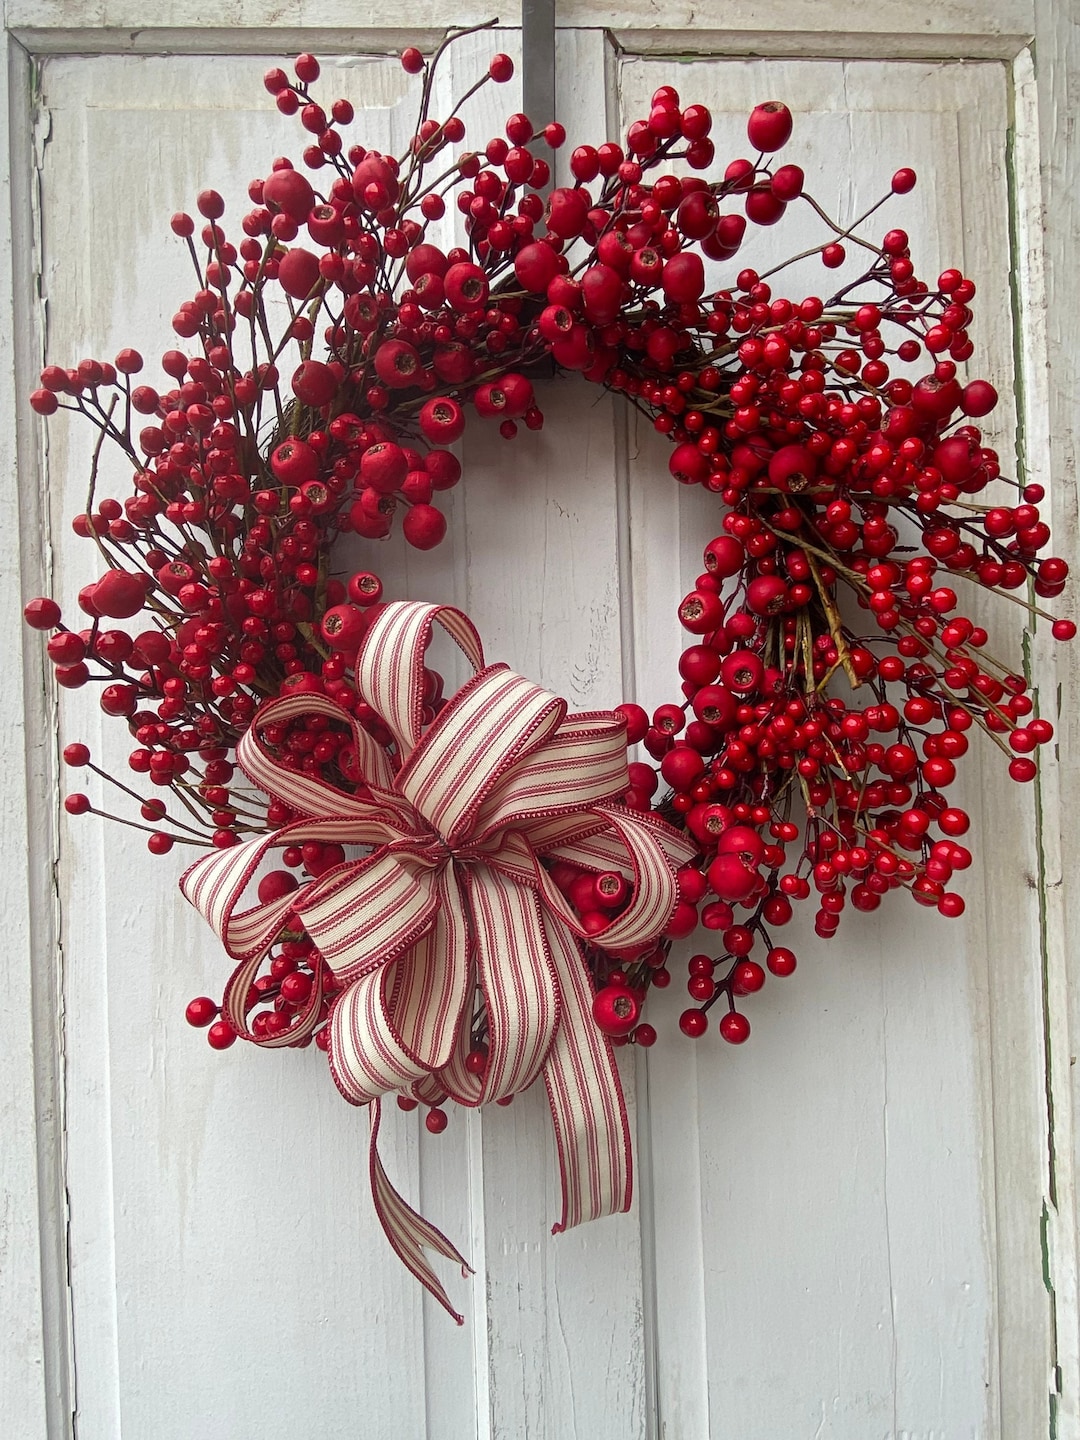 21-22 Diameter Round Red Berry Wreath for Fall, Christmas, and